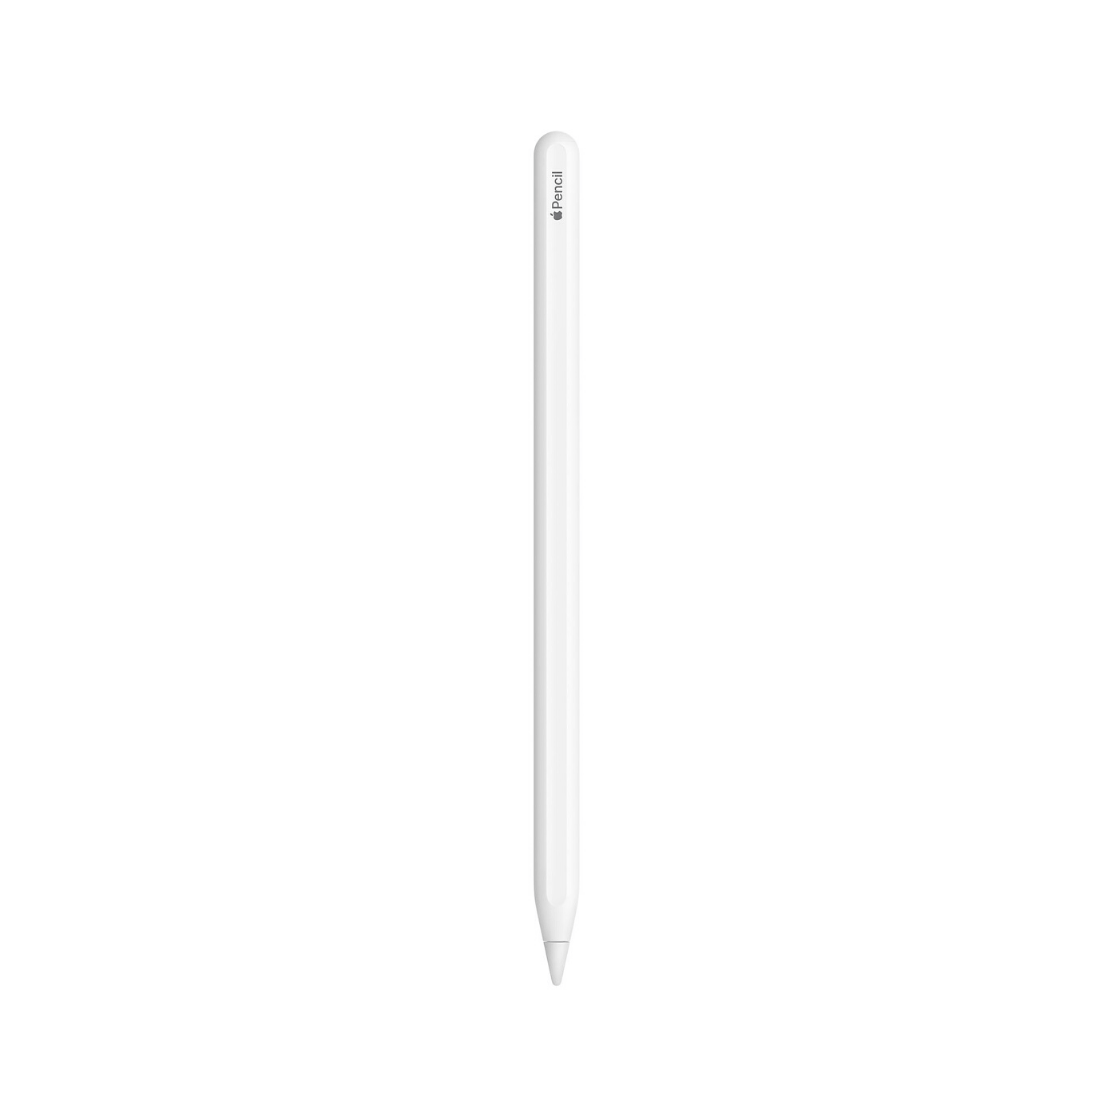 Apple Pencil 2nd Generation for Apple iPad Pro - QuickTech.in